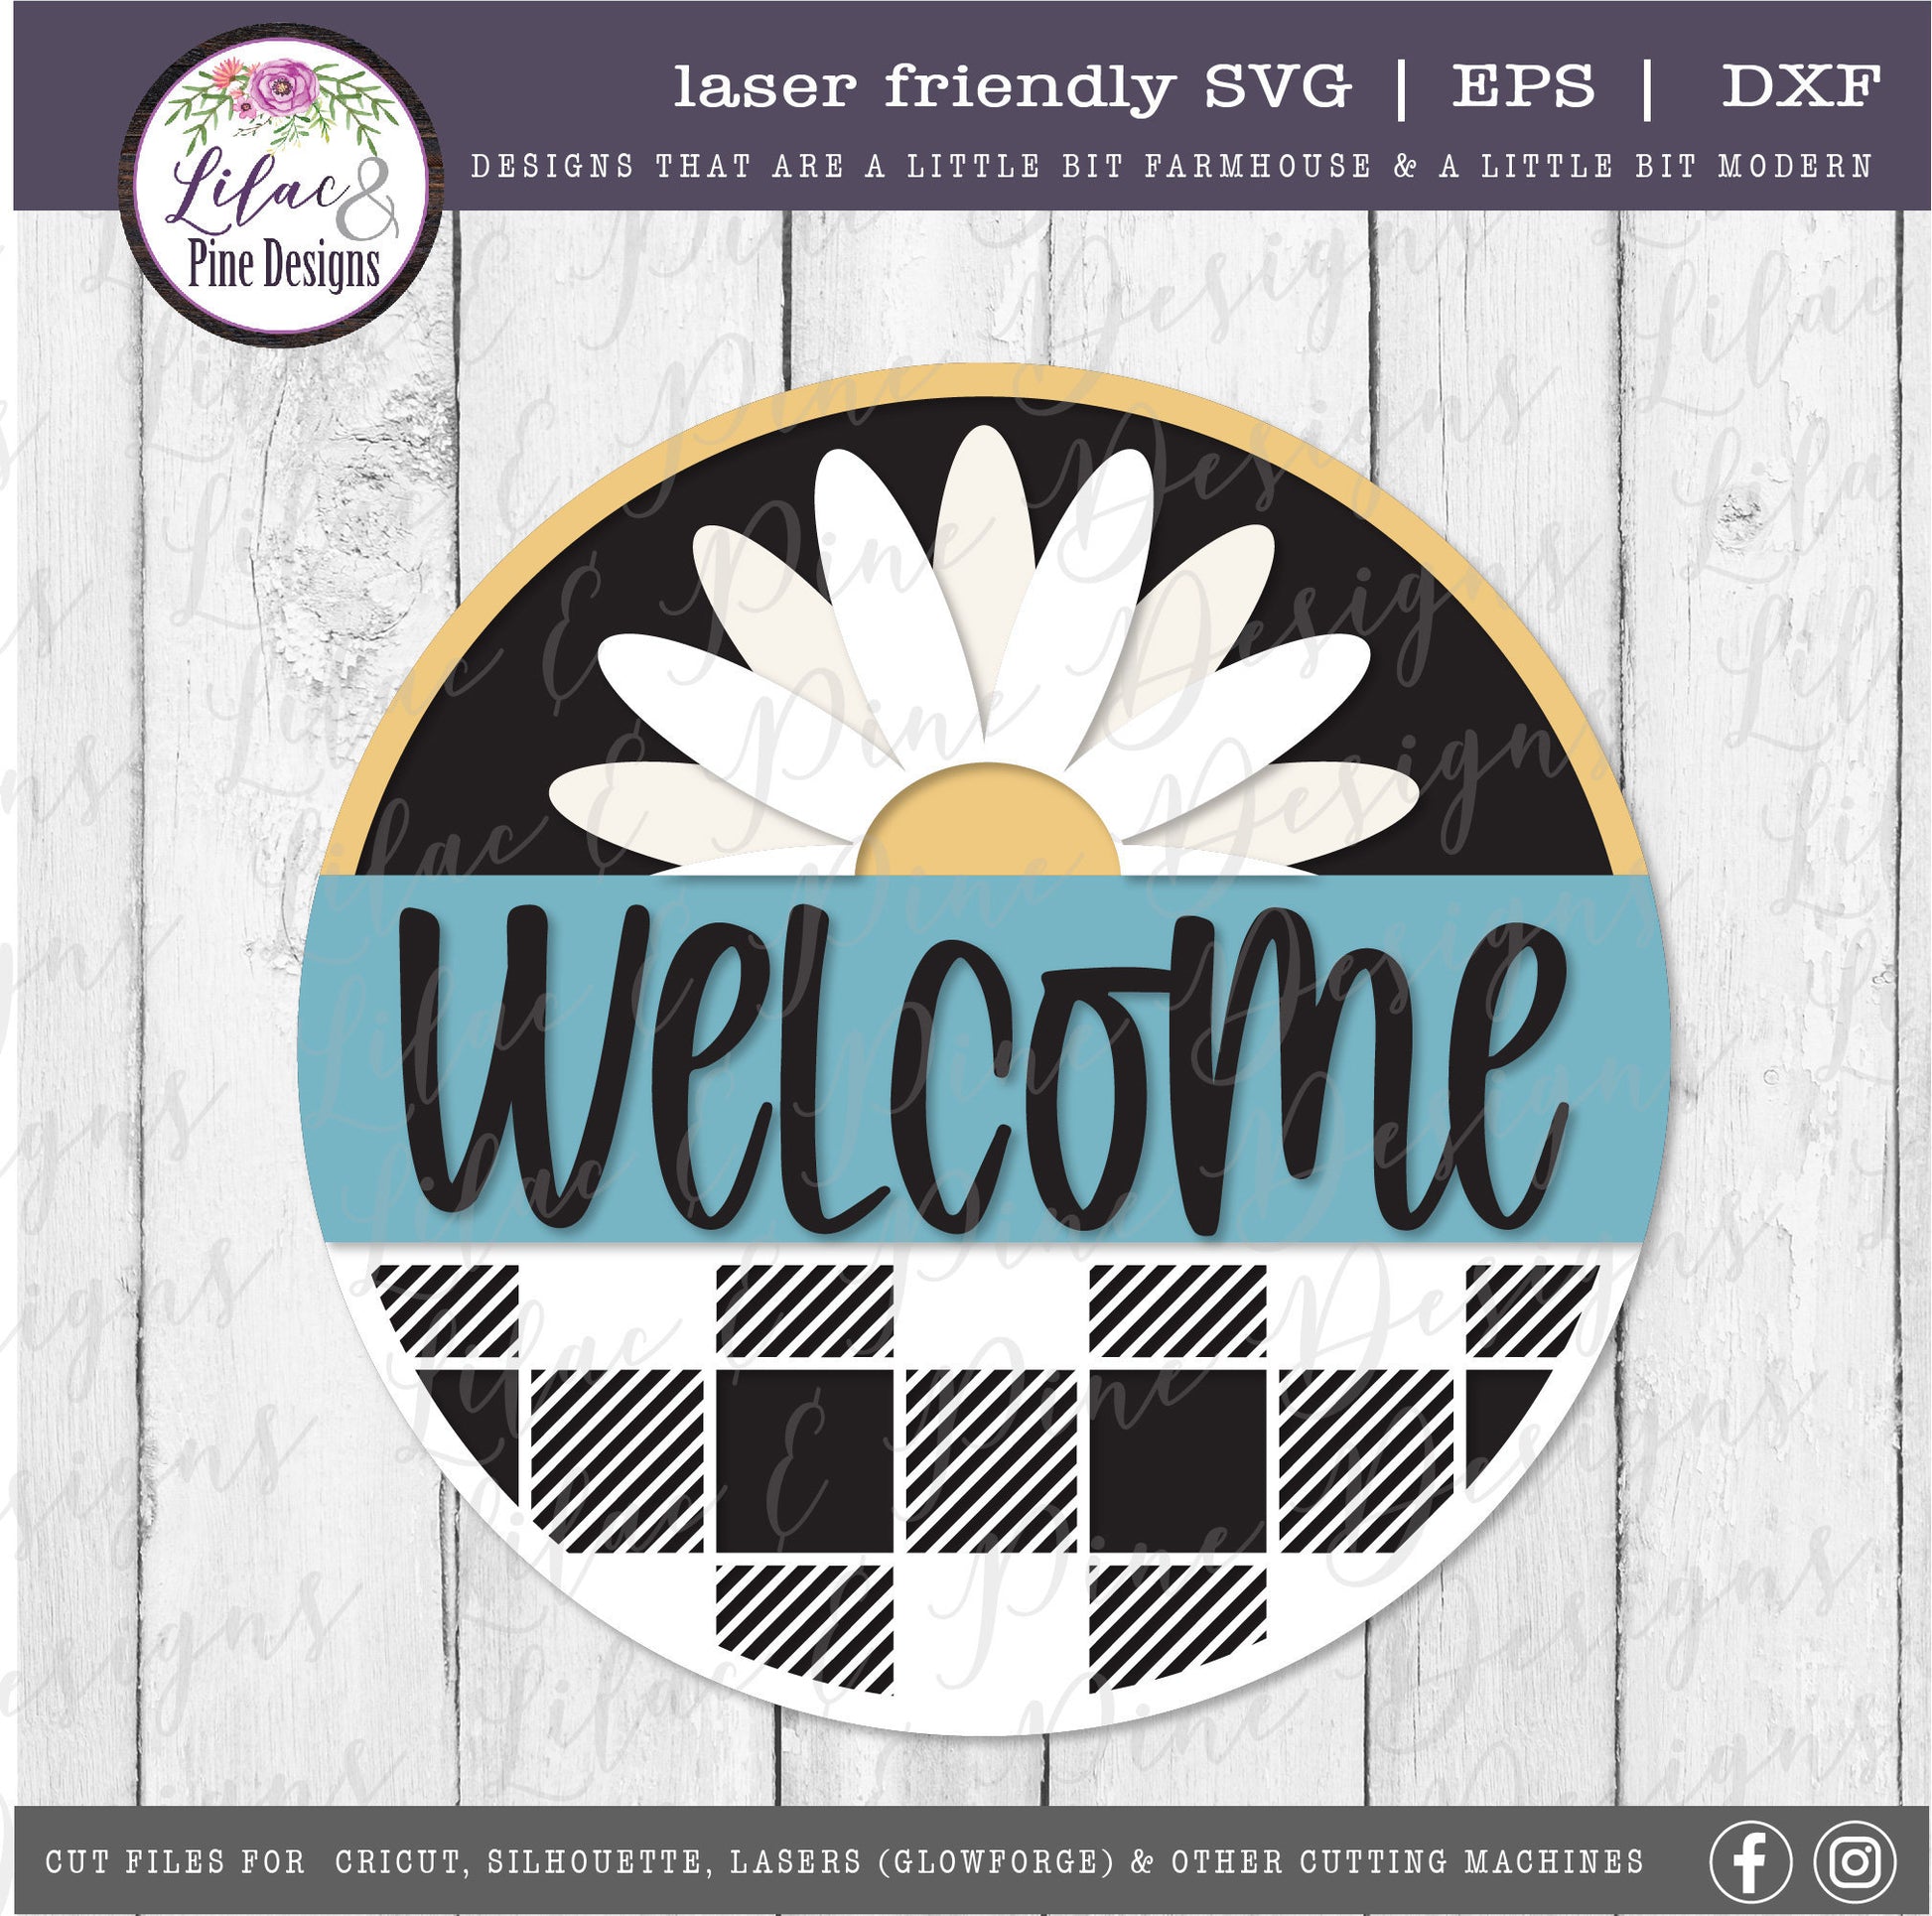 Daisy plaid welcome sign, summer decor, welcome SVG, round wood sign, farmhouse decor, daisy SVG, plaid Svg, Glowforge Svg, laser cut file